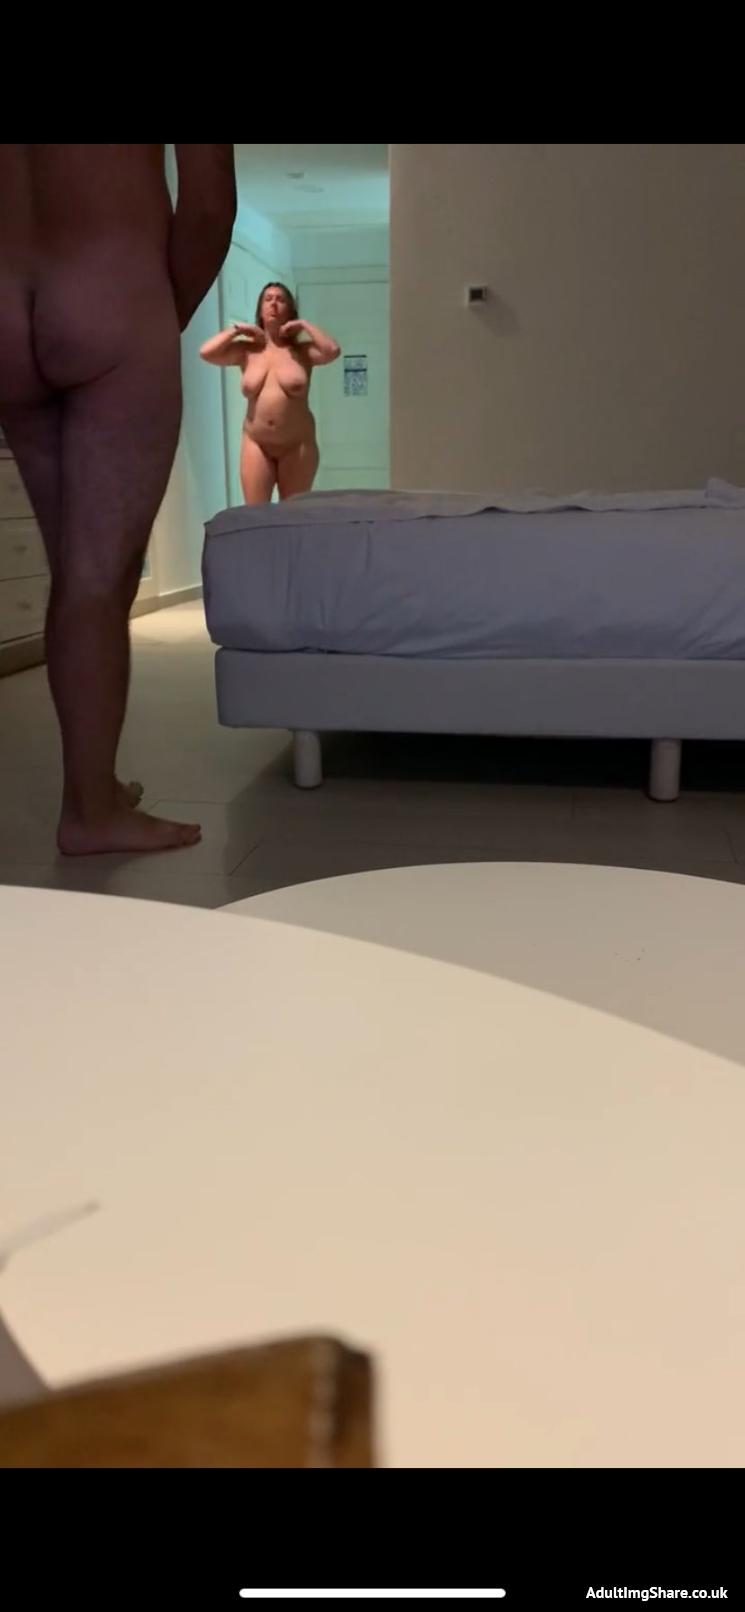 Gorgeous milf porn wife Lisa Crook walking around the hotel naked while on vacation 